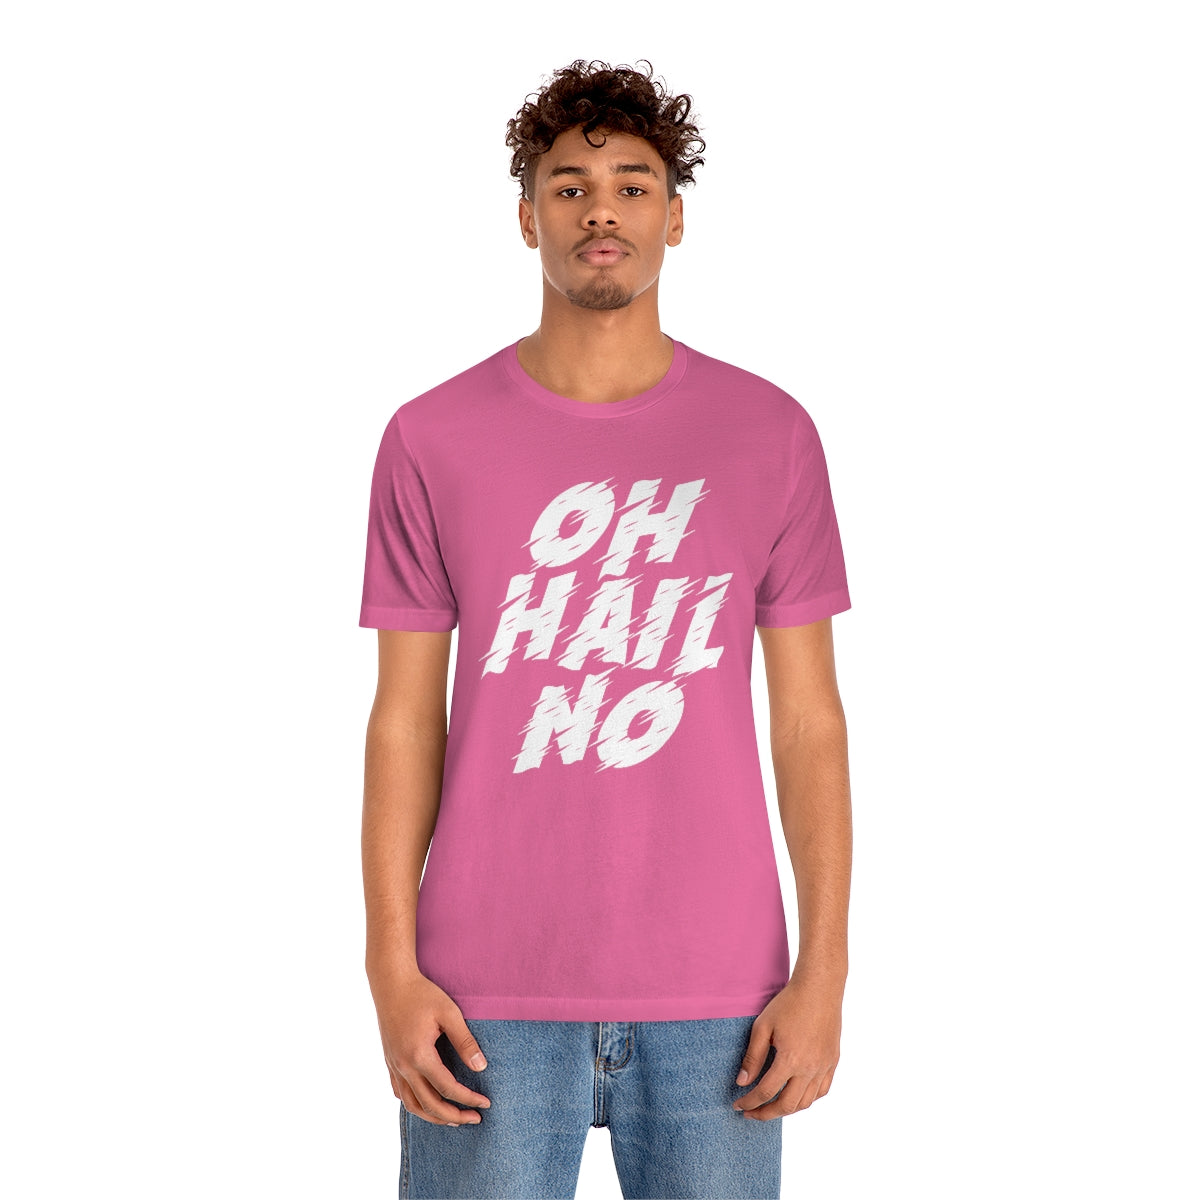 Hail No Designs Tee Helicity Oh –